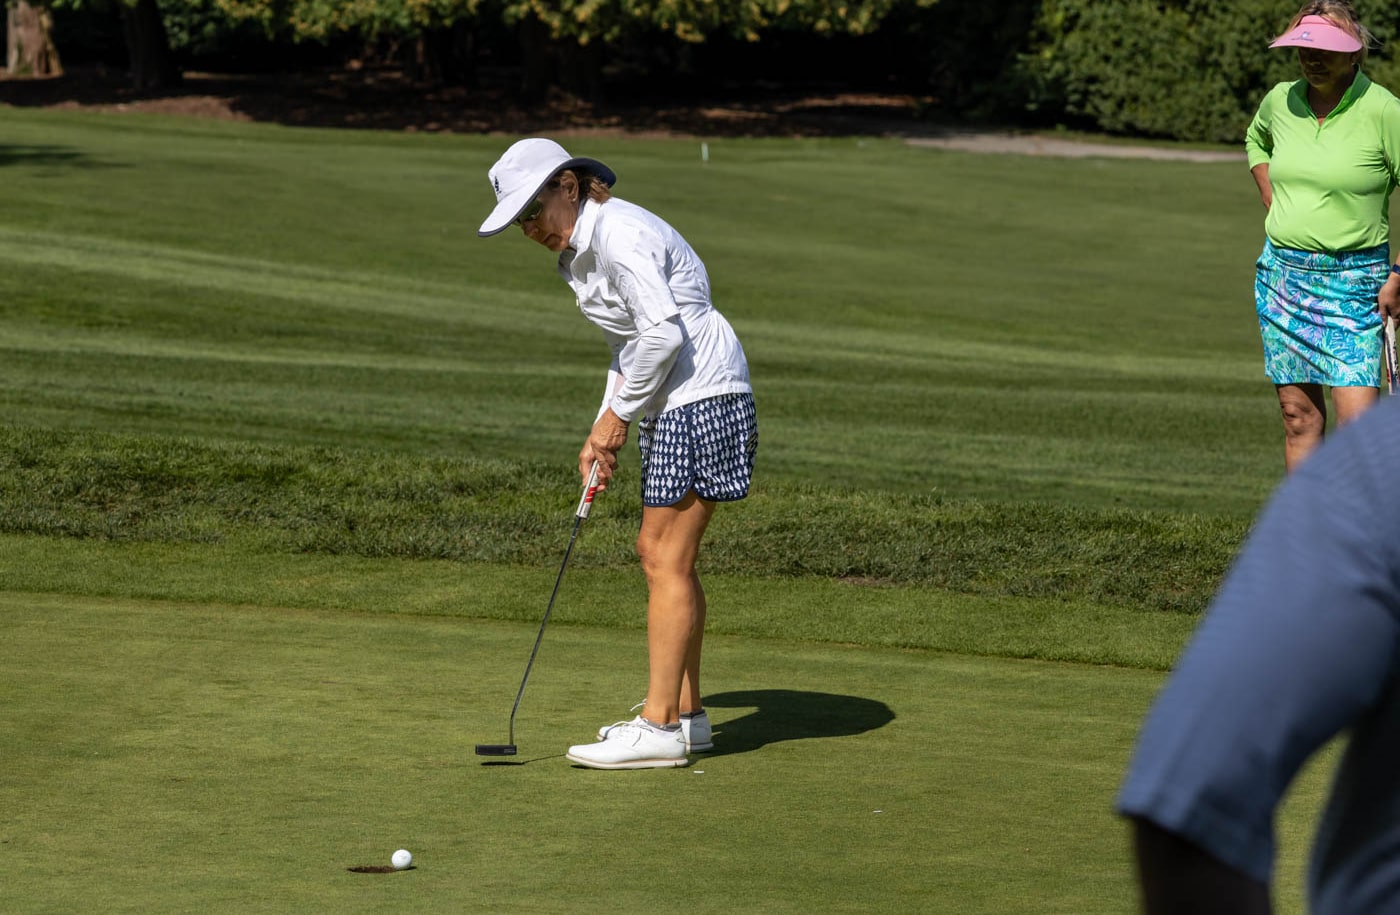 Country-Club-Of-New-Bedford FB-2023-Womens-FB-Gallery August-2023-Country-Club-Of-New-Bedford-FB-2023-Womens-FB-Gallery August-2023-Womens-FB-Gallery-Tuesday-Photos-Image-12